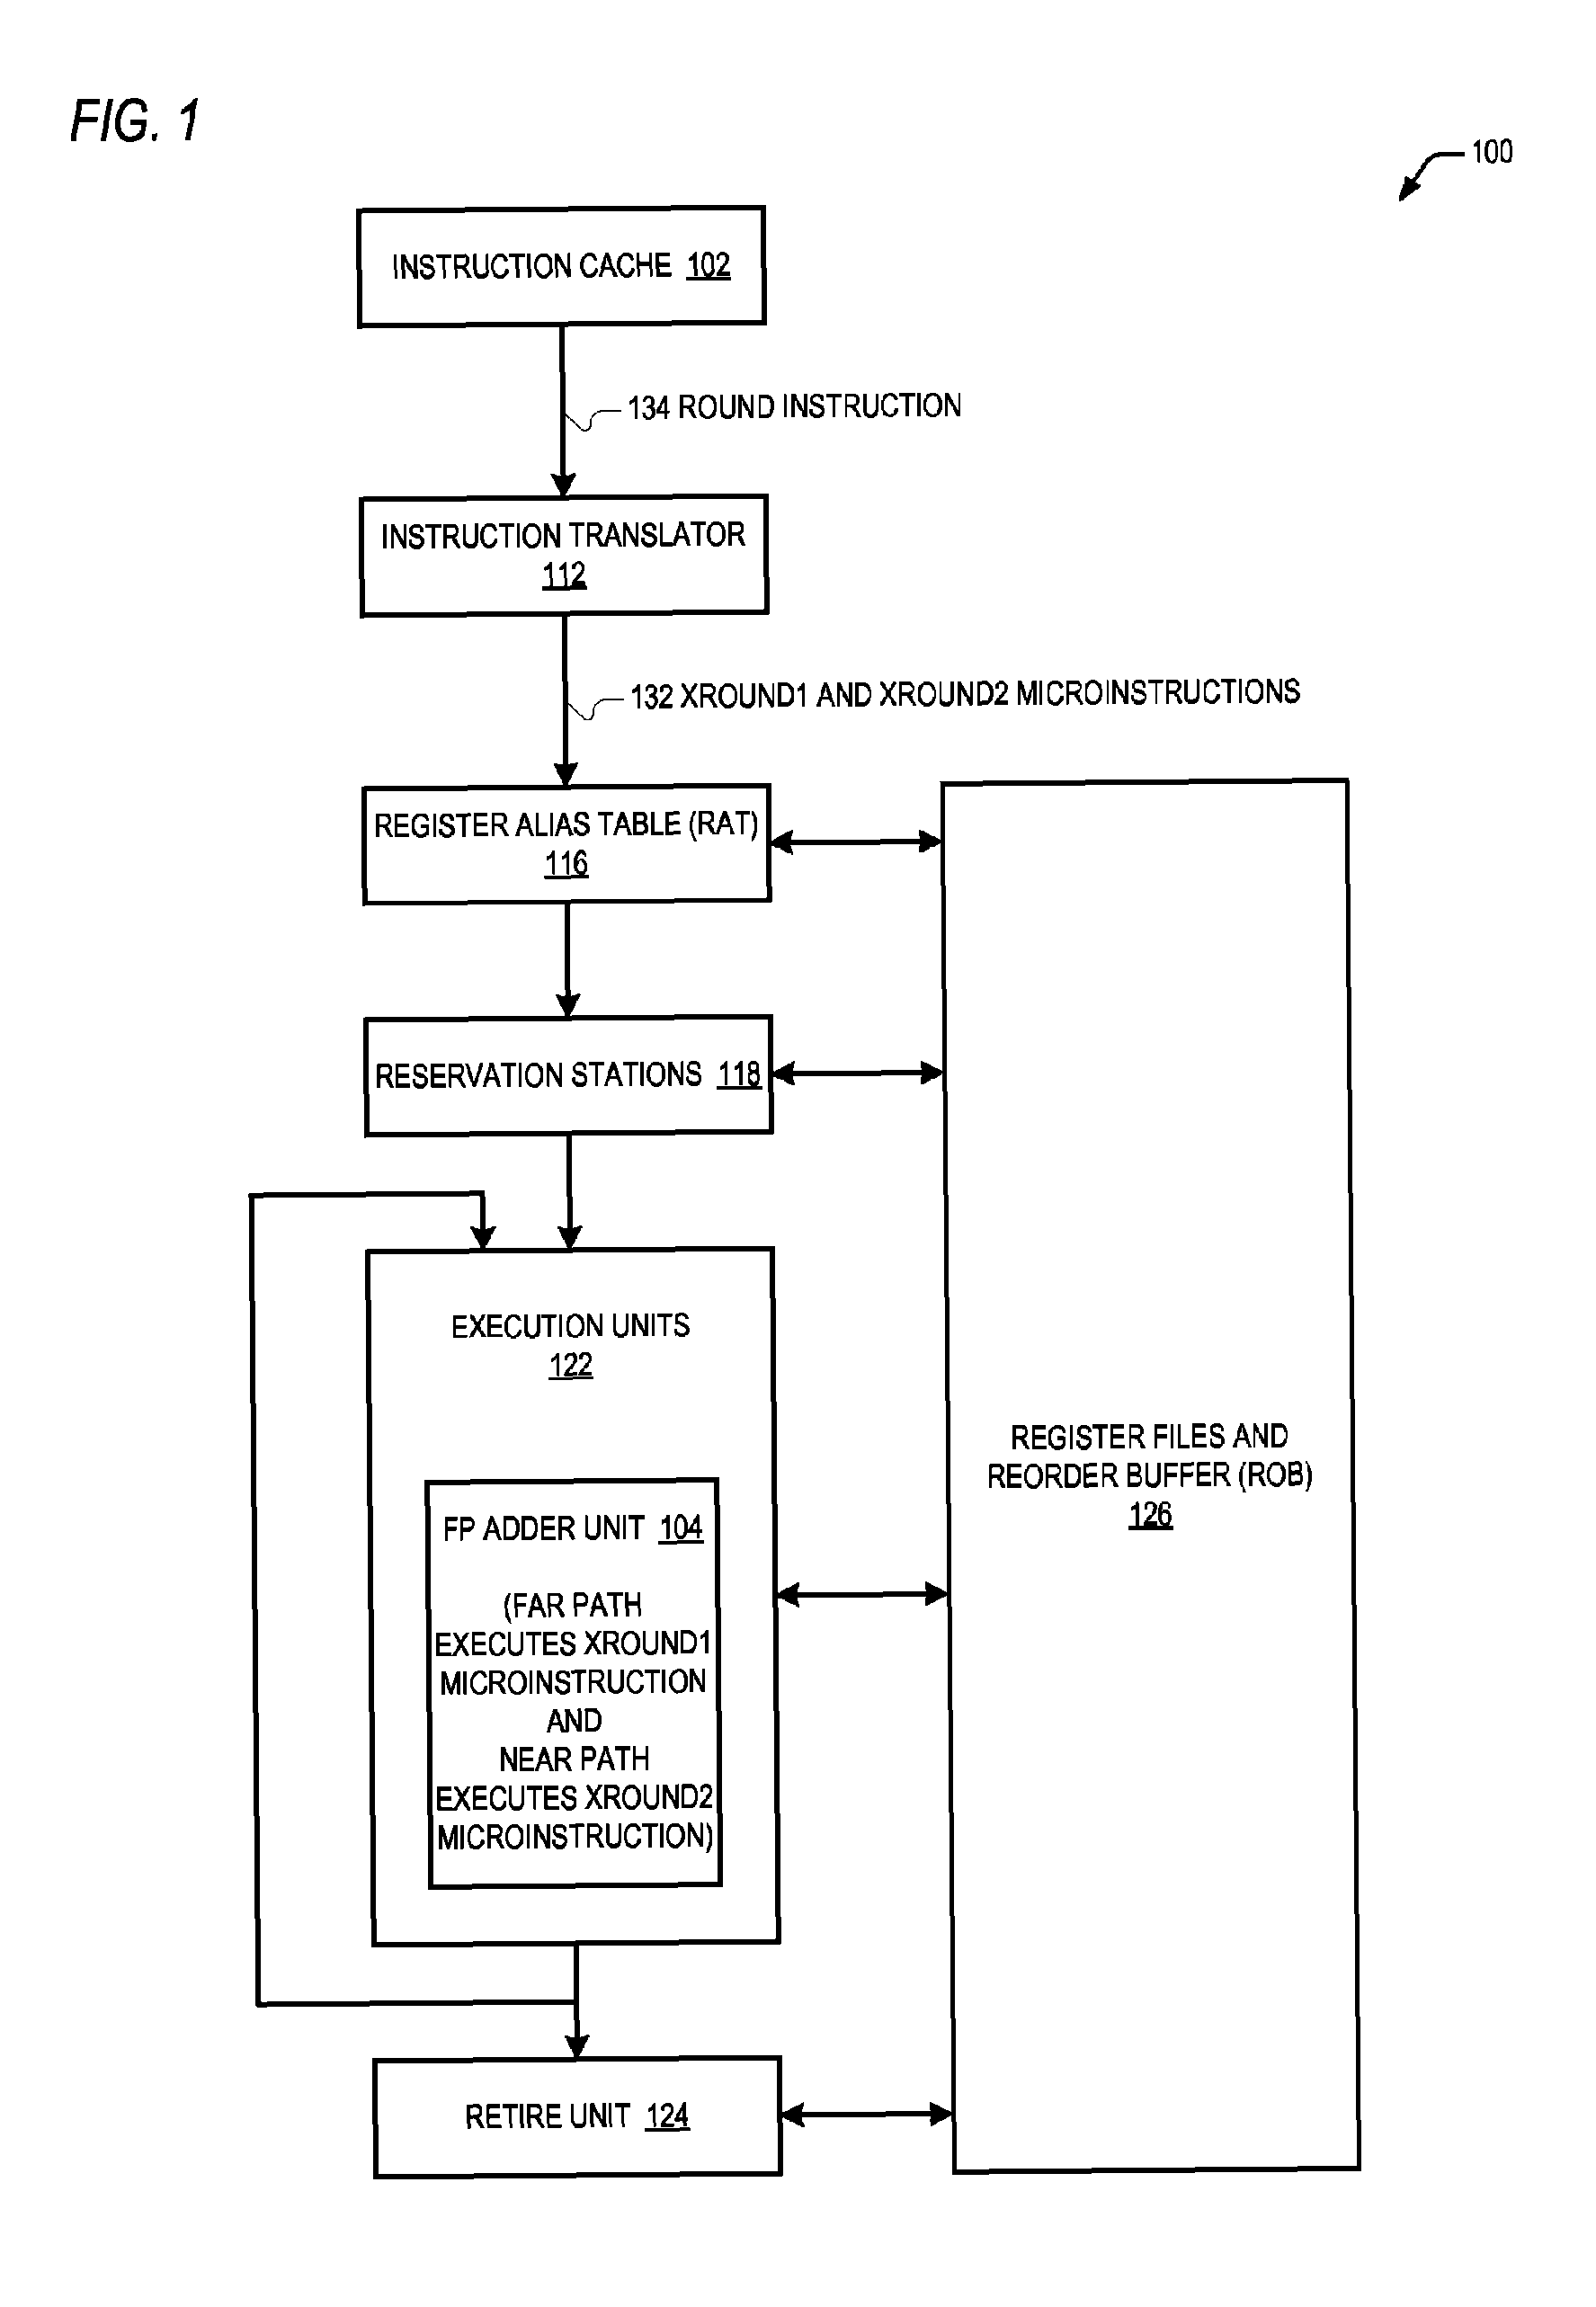 Non-atomic scheduling of micro-operations to perform round instruction